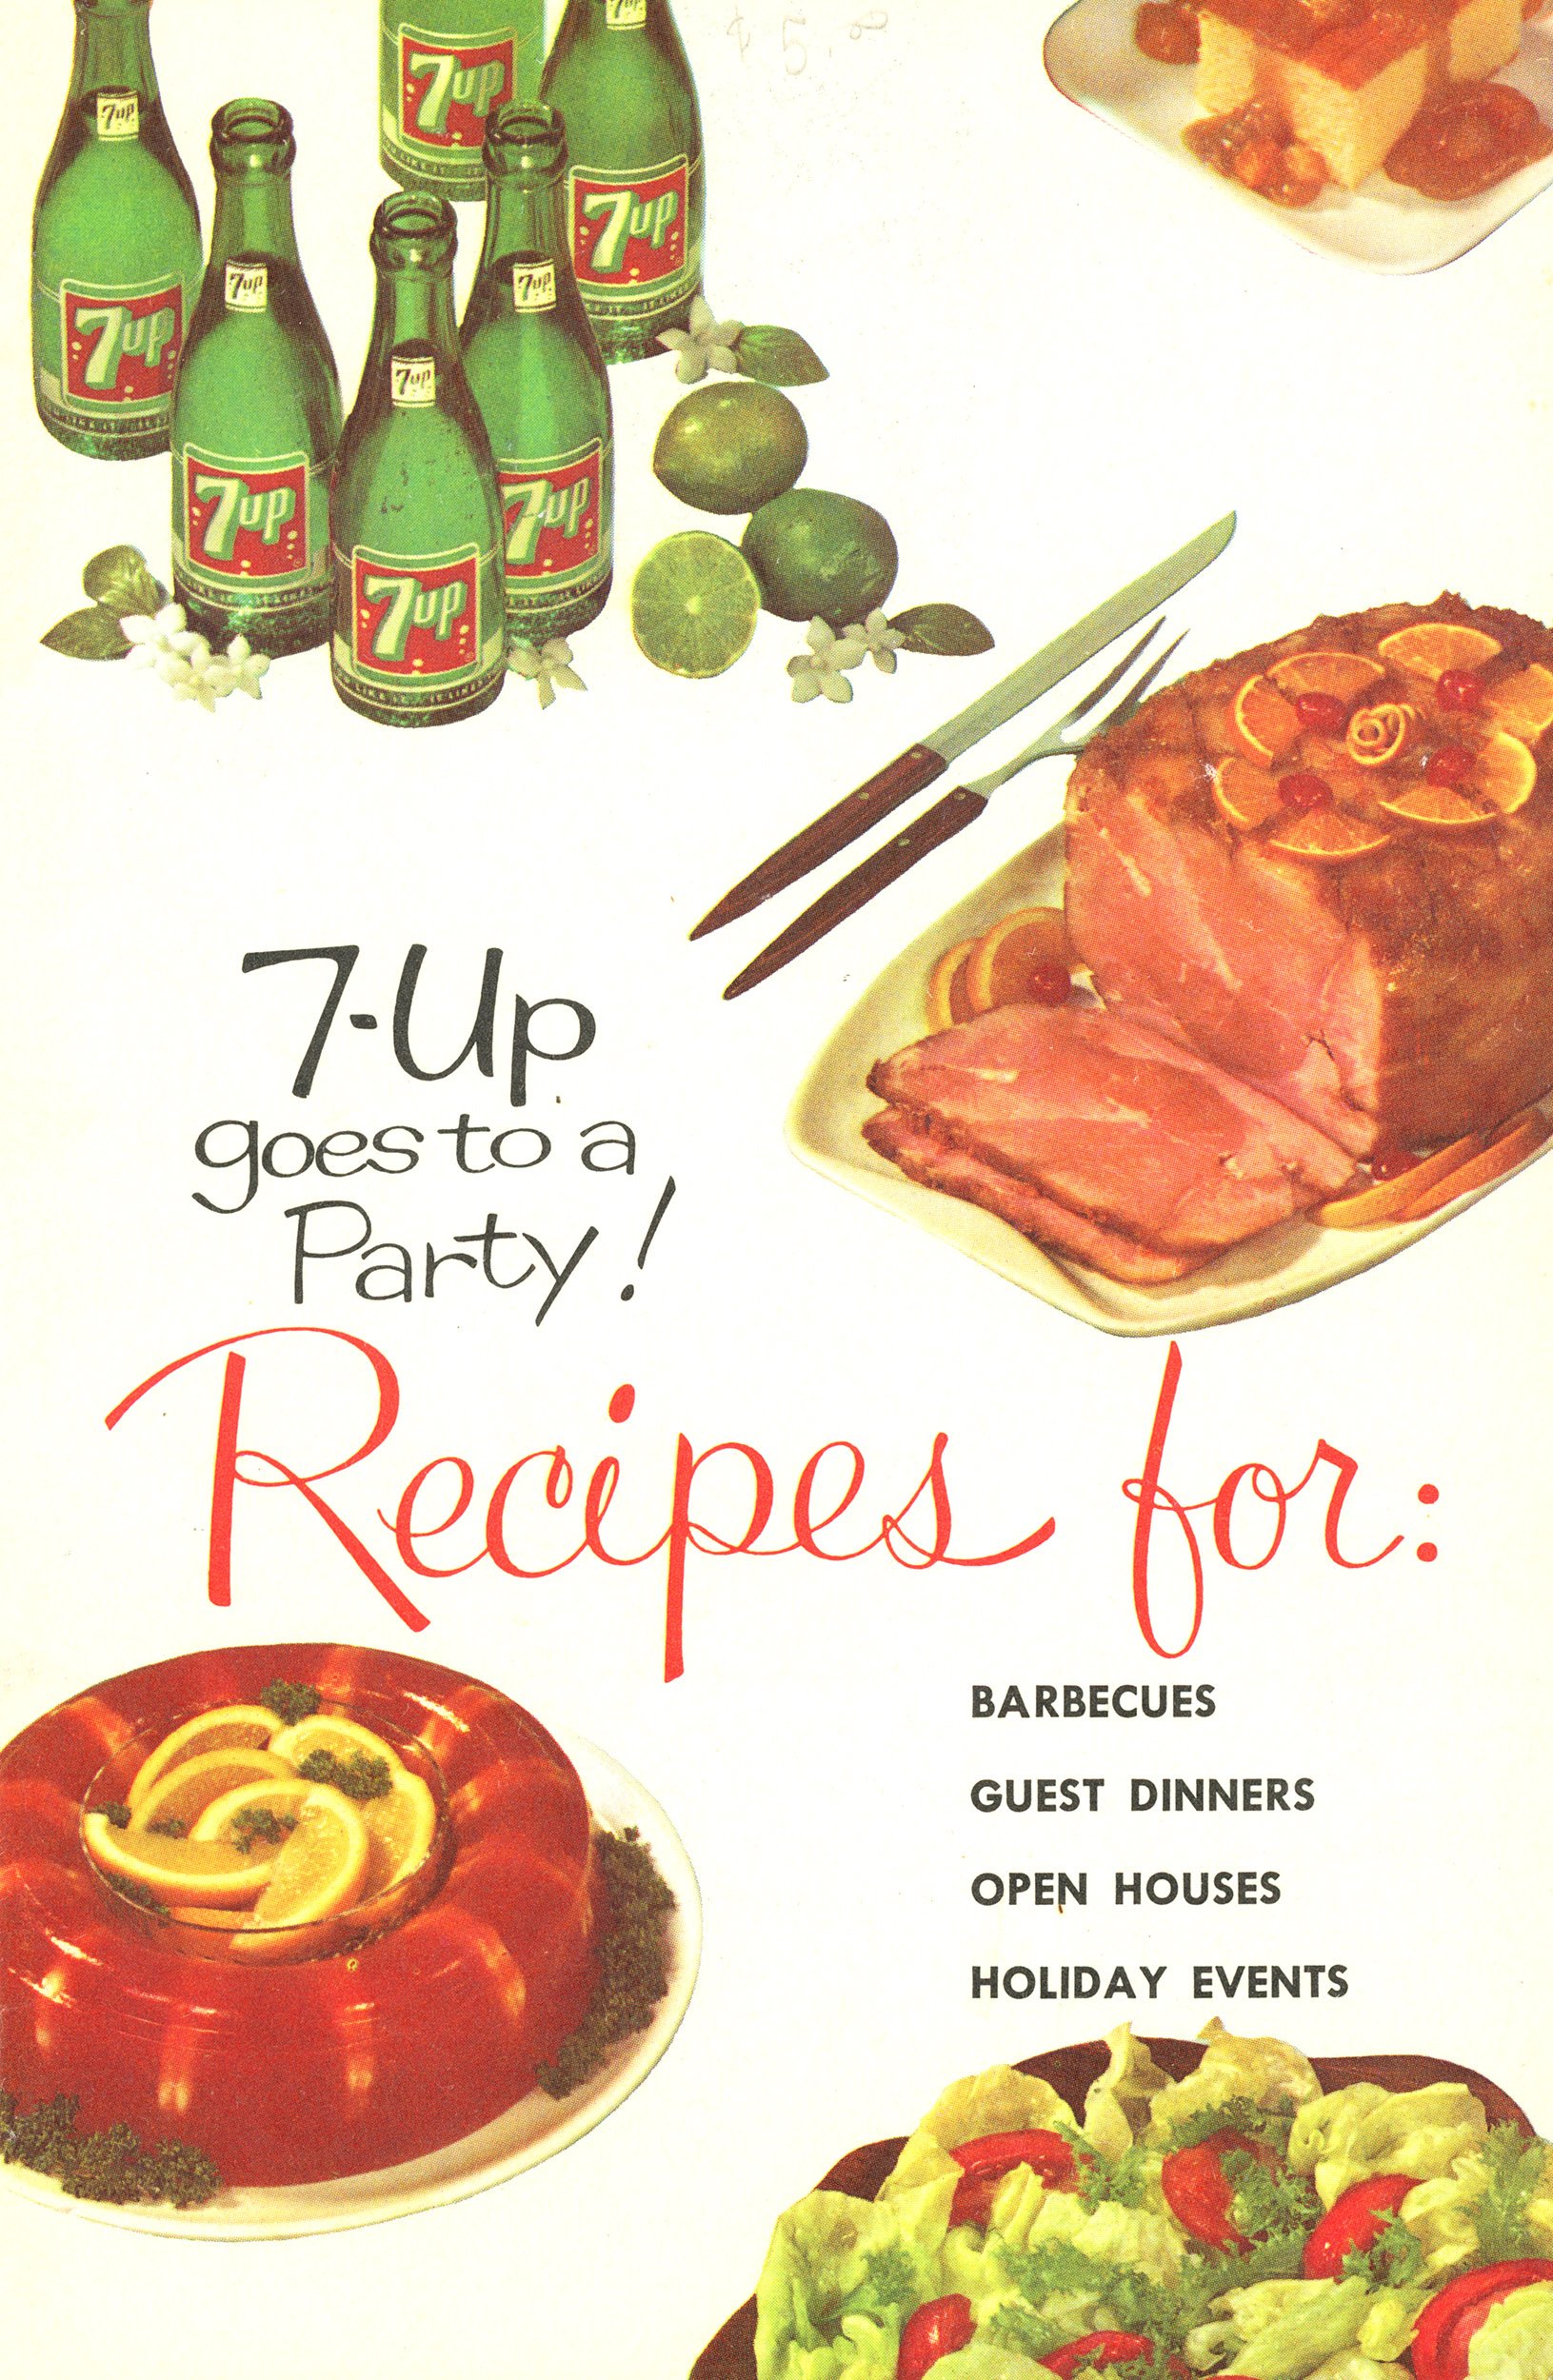 7-Up Goes to a Party! (1961)